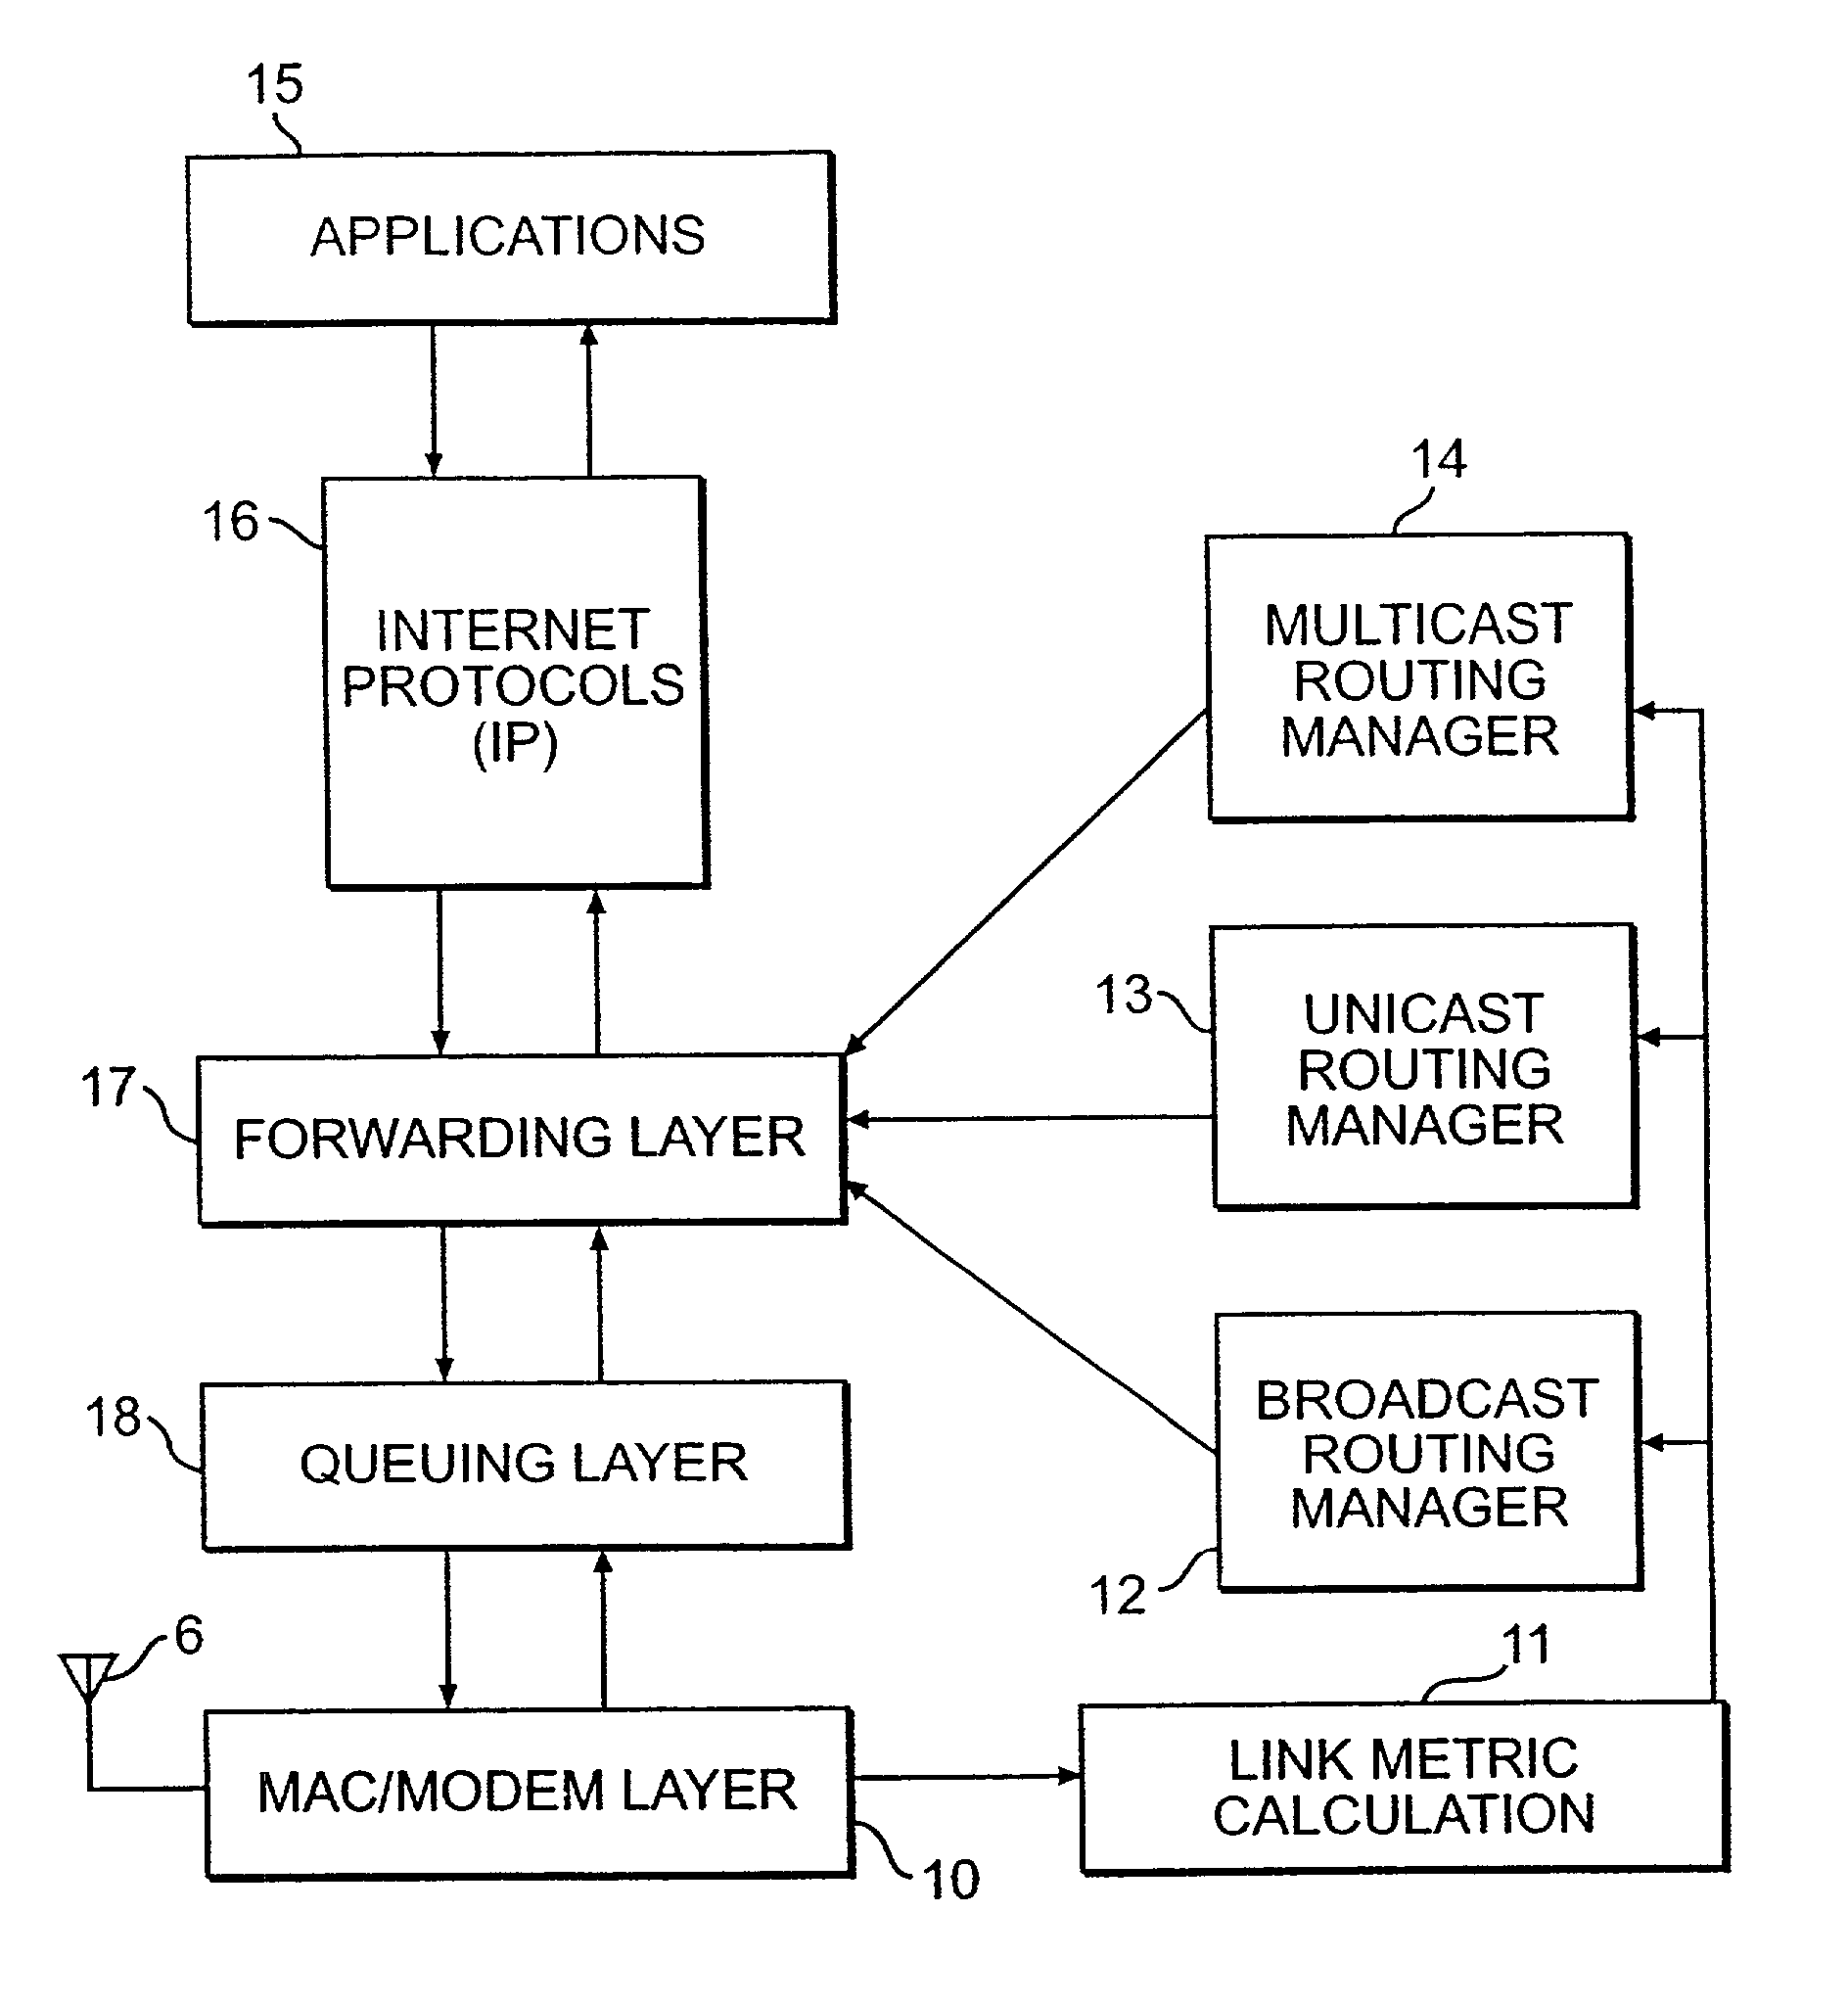 Architecture and mechanism for forwarding layer interfacing for networks